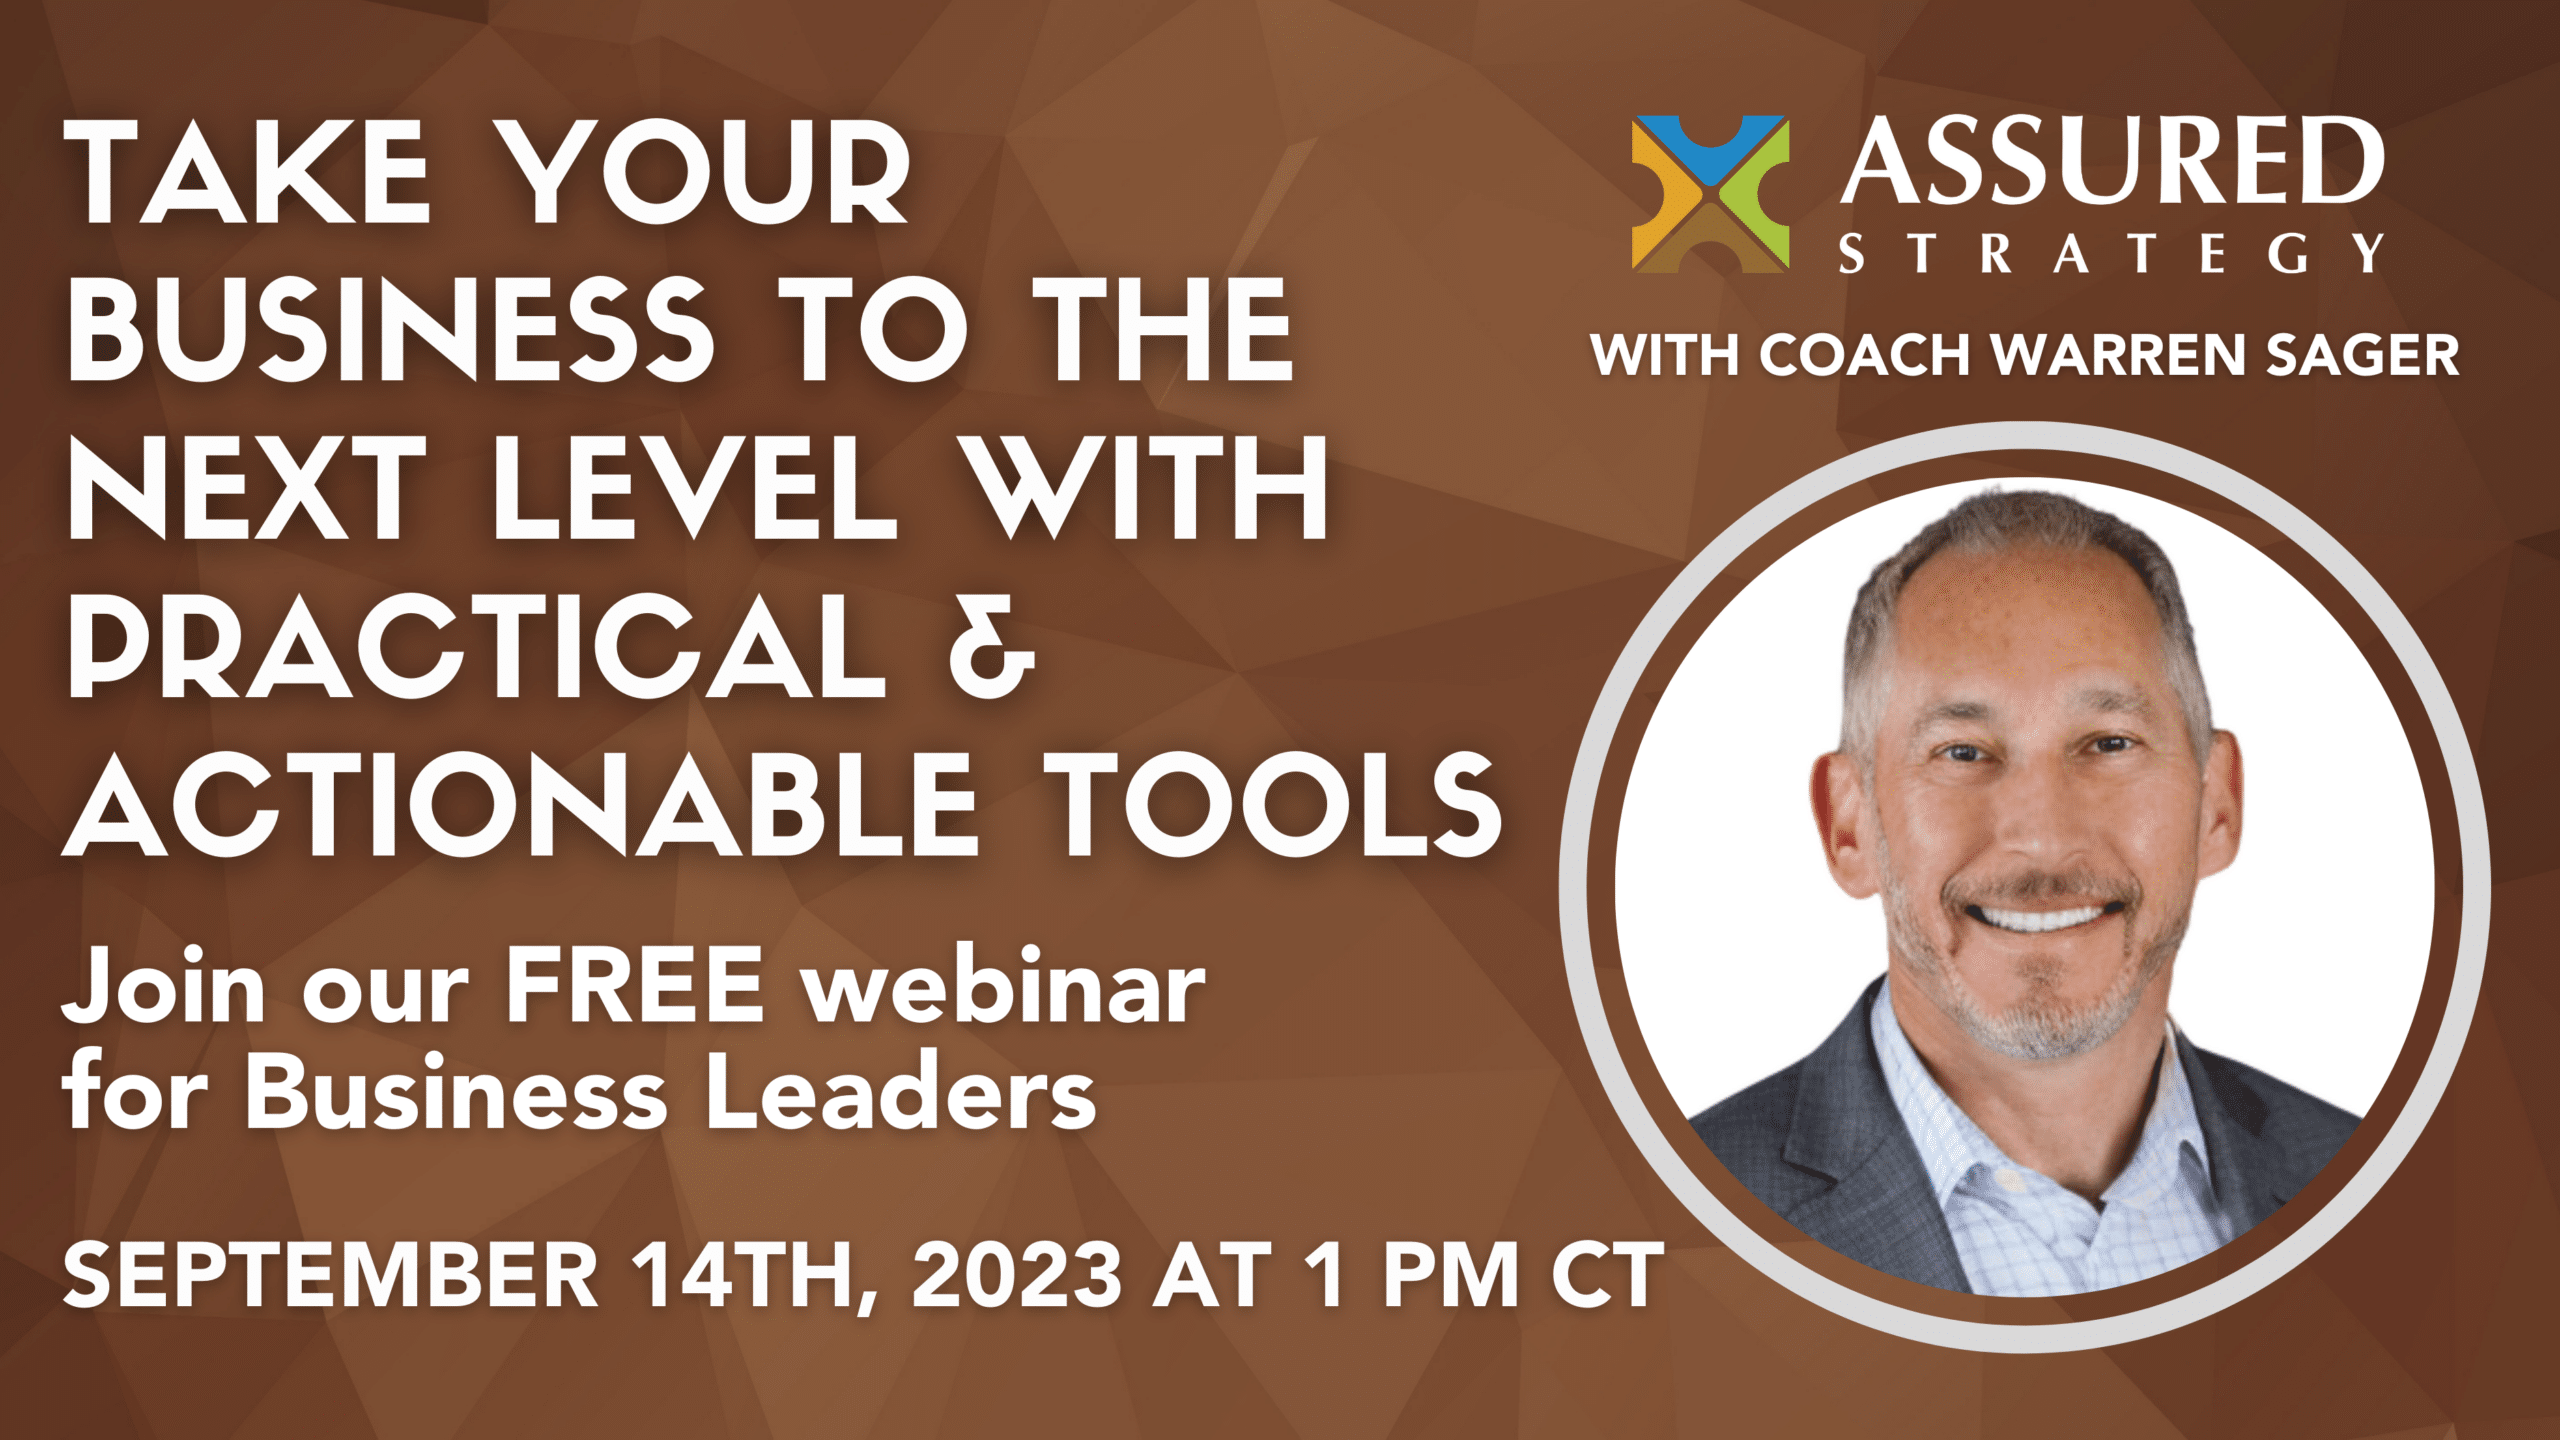 Free Webinar: How to Grow Your Business with 5 Proven Tools – September 14th from 1-2pm CT